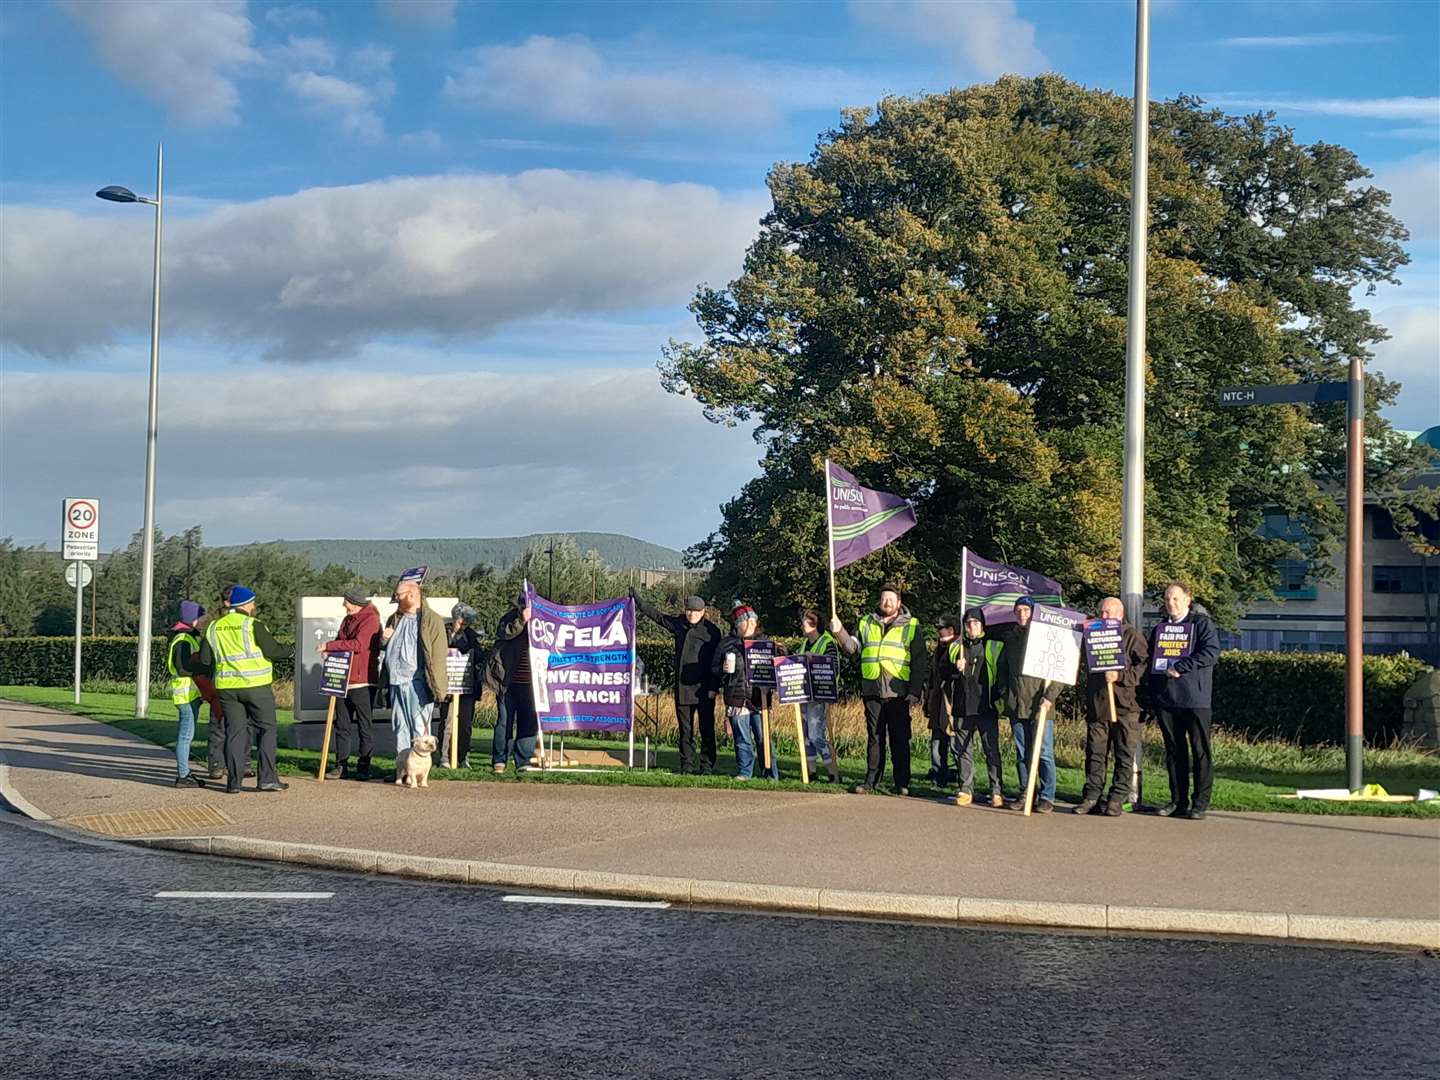 Members of EIS-Fela and Unison on the picket line.